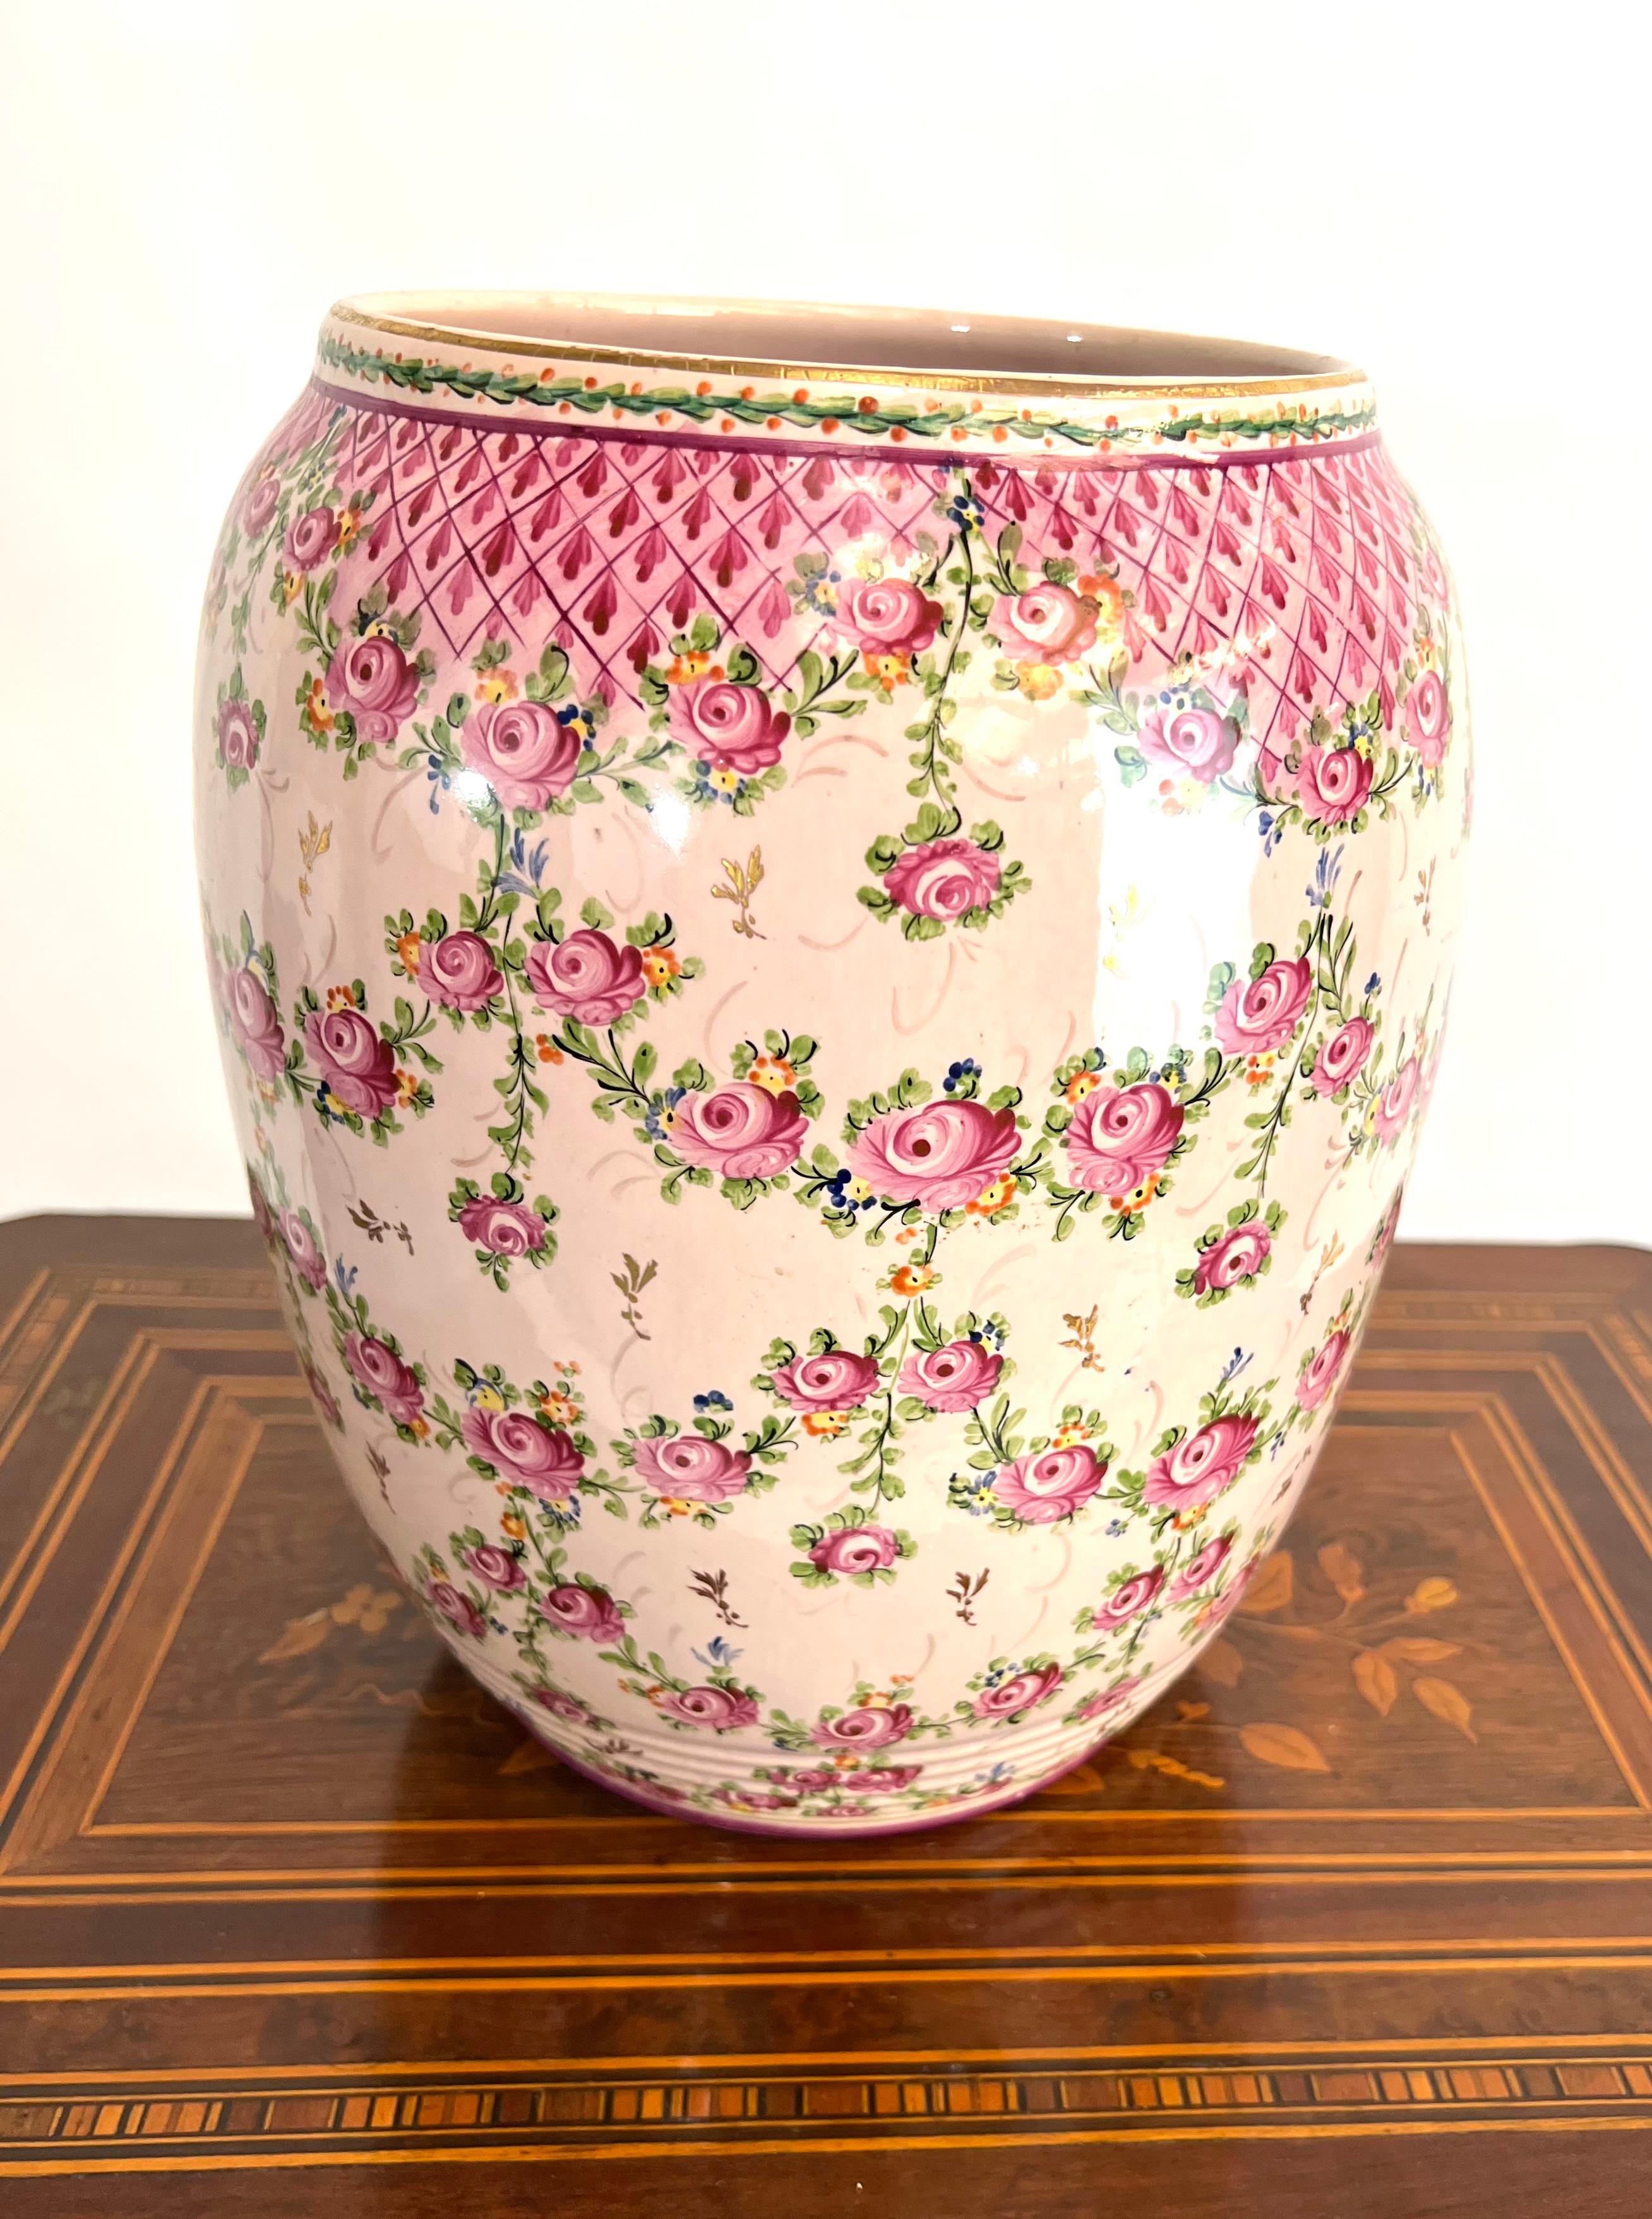 This superb Clamecy faience vase features a delightful decoration of intertwined roses and delicate lattice patterns. The vase is carefully signed underneath, adding an authentic touch and value to this piece. With its romantic and delicate